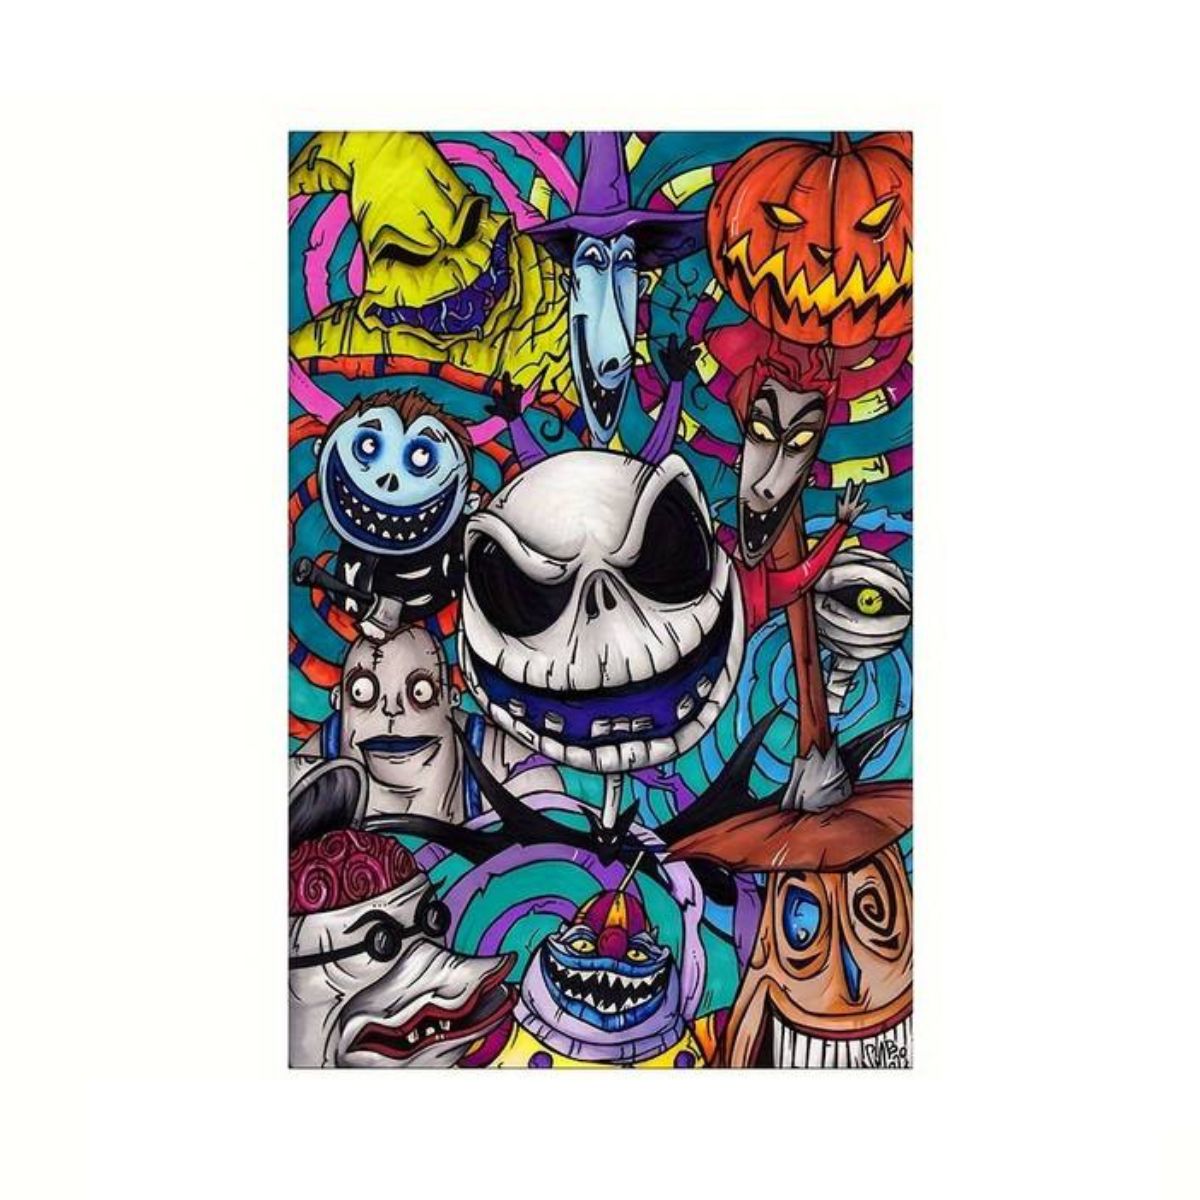 19.6x29.5 Inches Unframed The Nightmare Before Christmas Canvas Poster